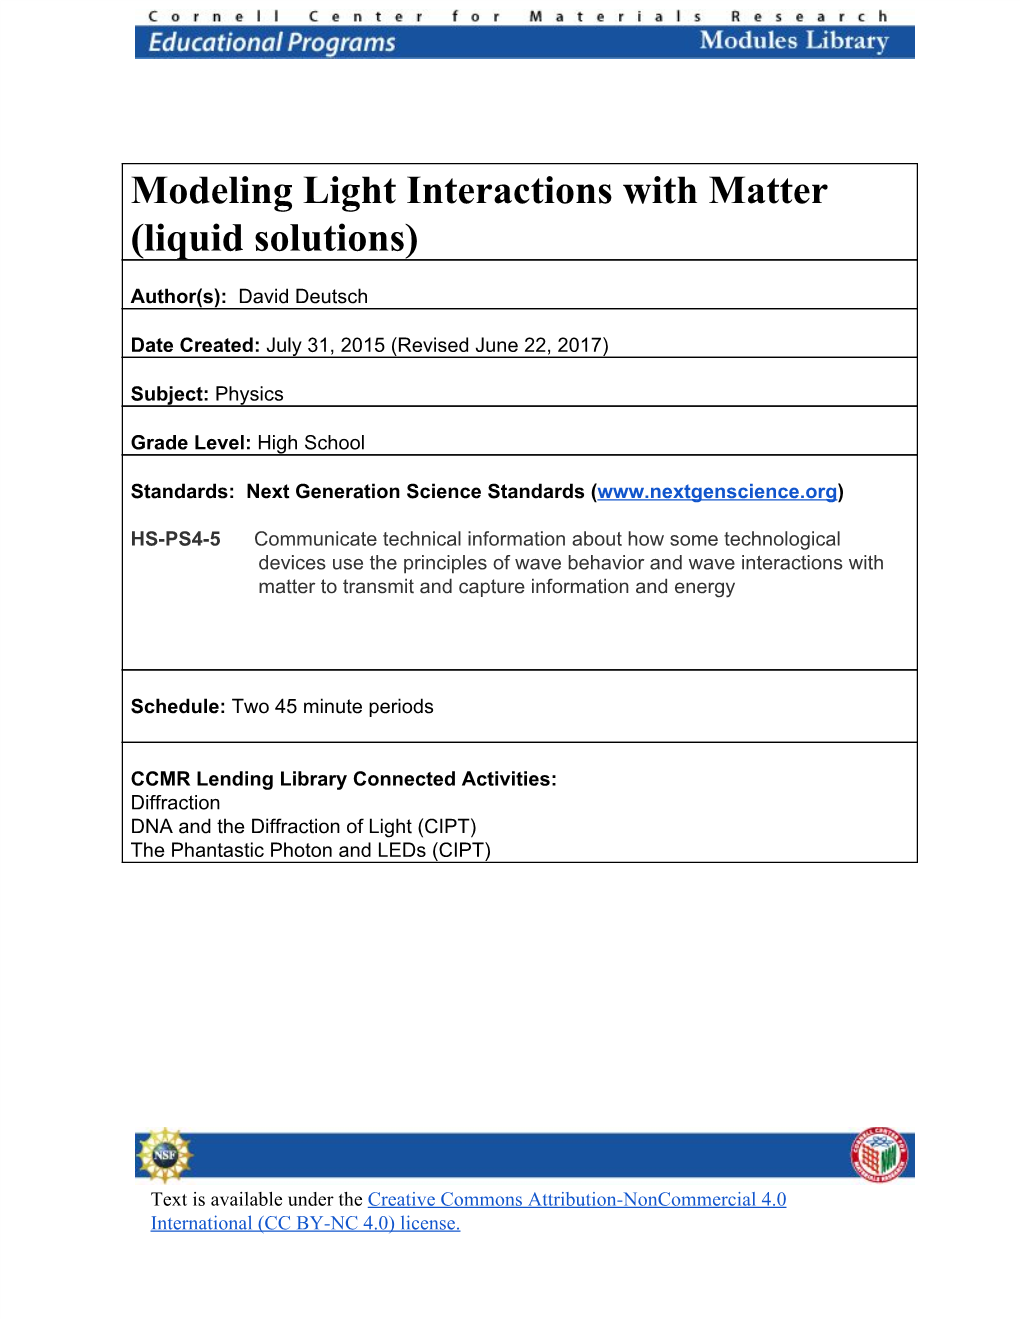 Modeling Light Interactions with Matter (Liquid Solutions)